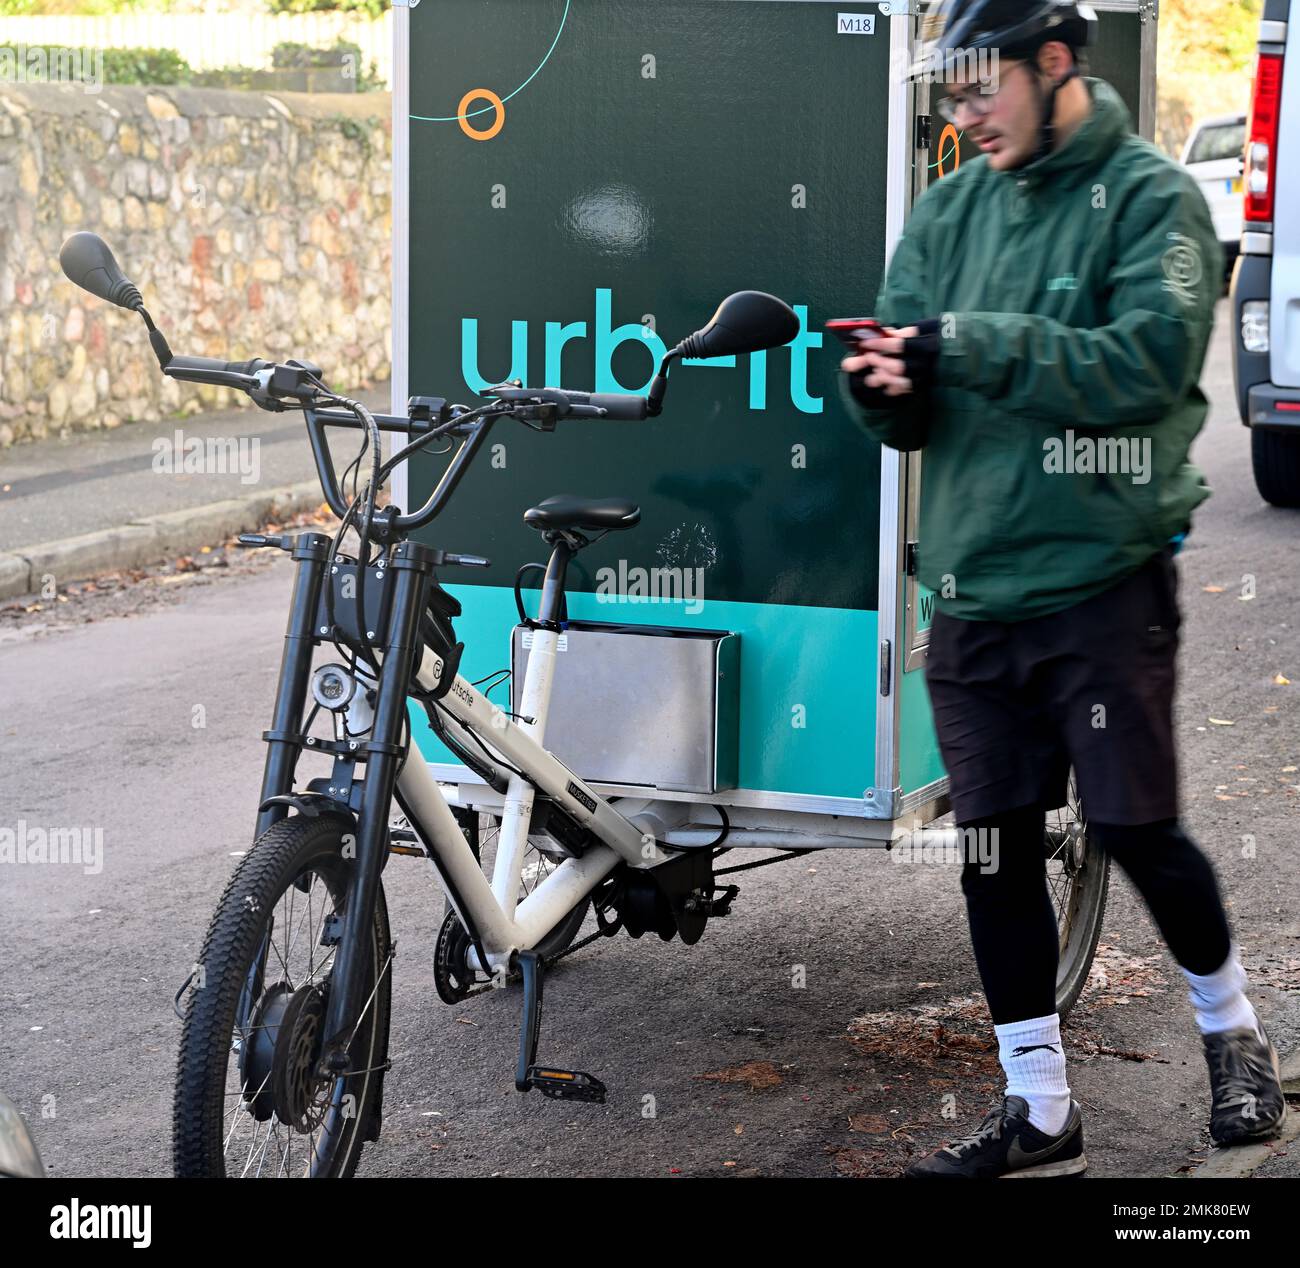 Cargo bike and cyclist used for delivering parcels by cycle courier urb-it, England Stock Photo